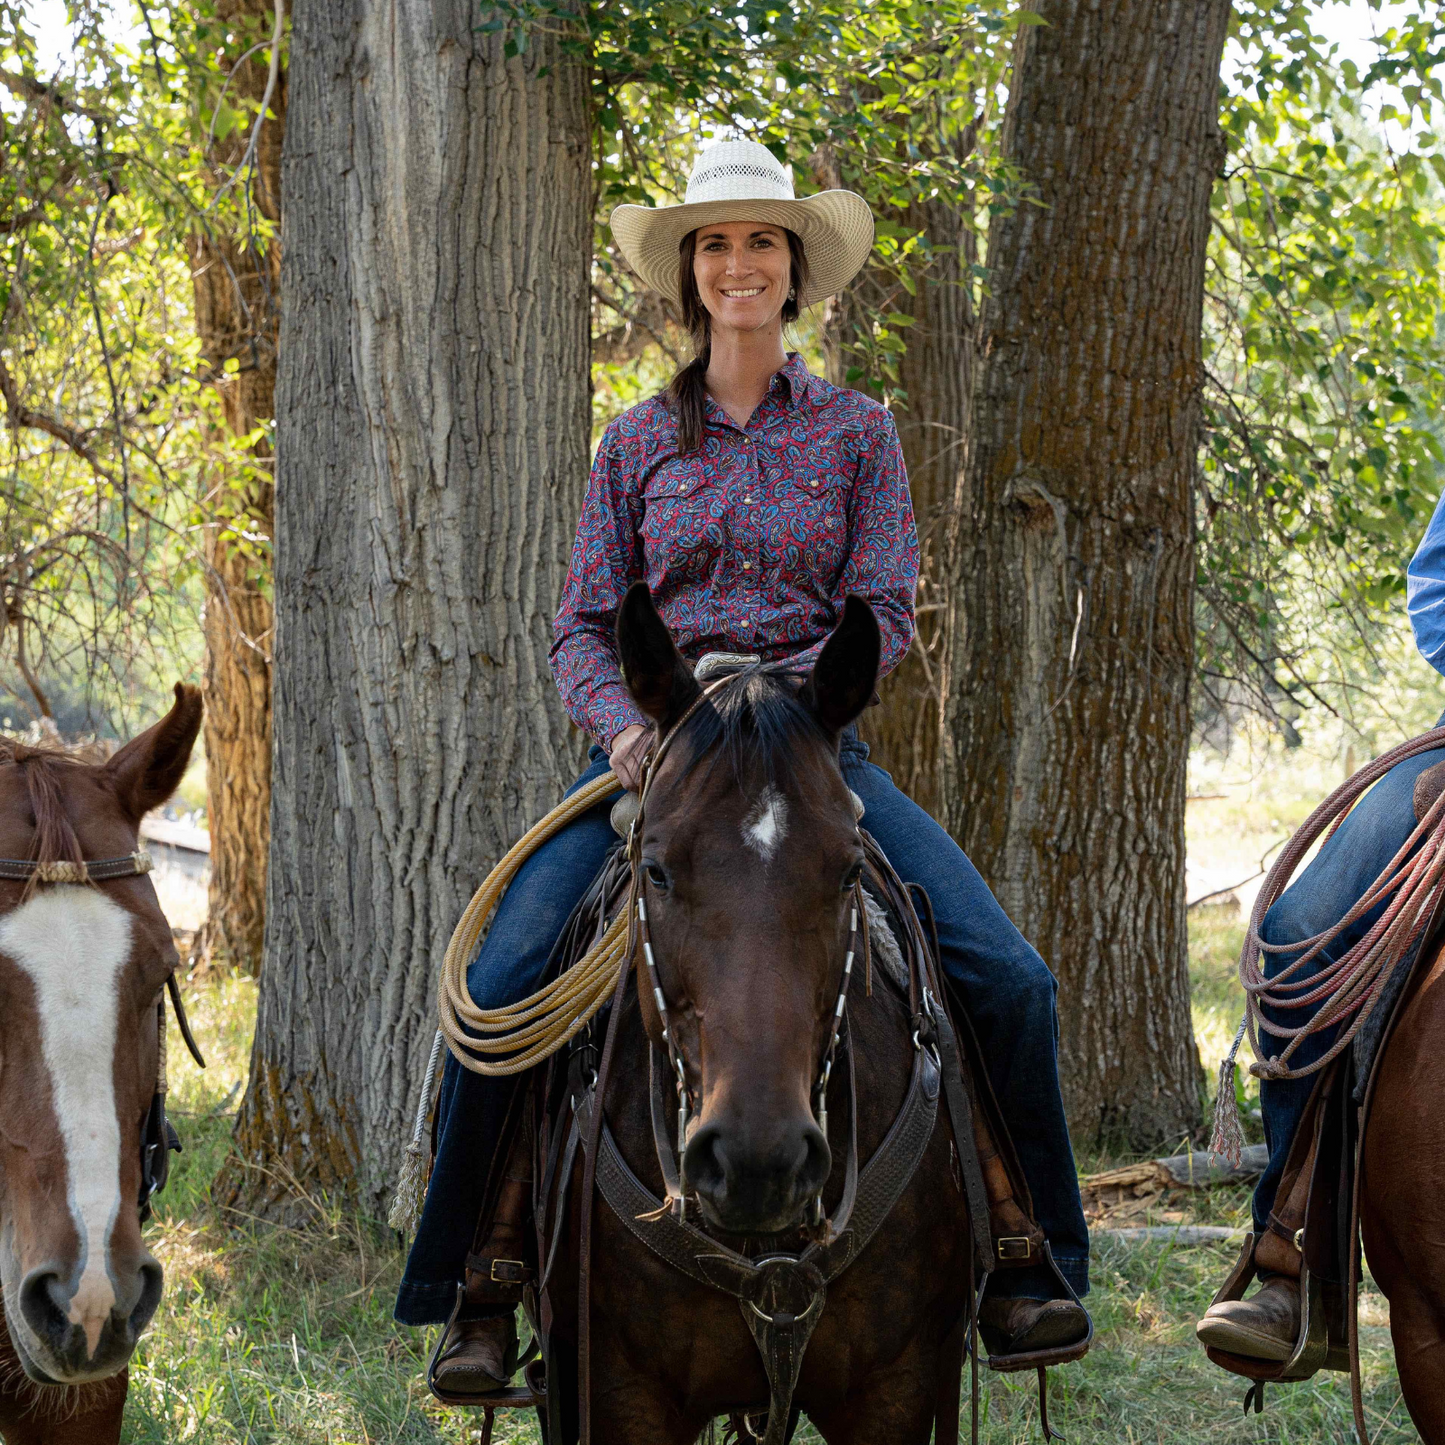 From her ranch to your door: Meet Cowgirl Meat Co. founder and rancher Jaimie Stoltzfus